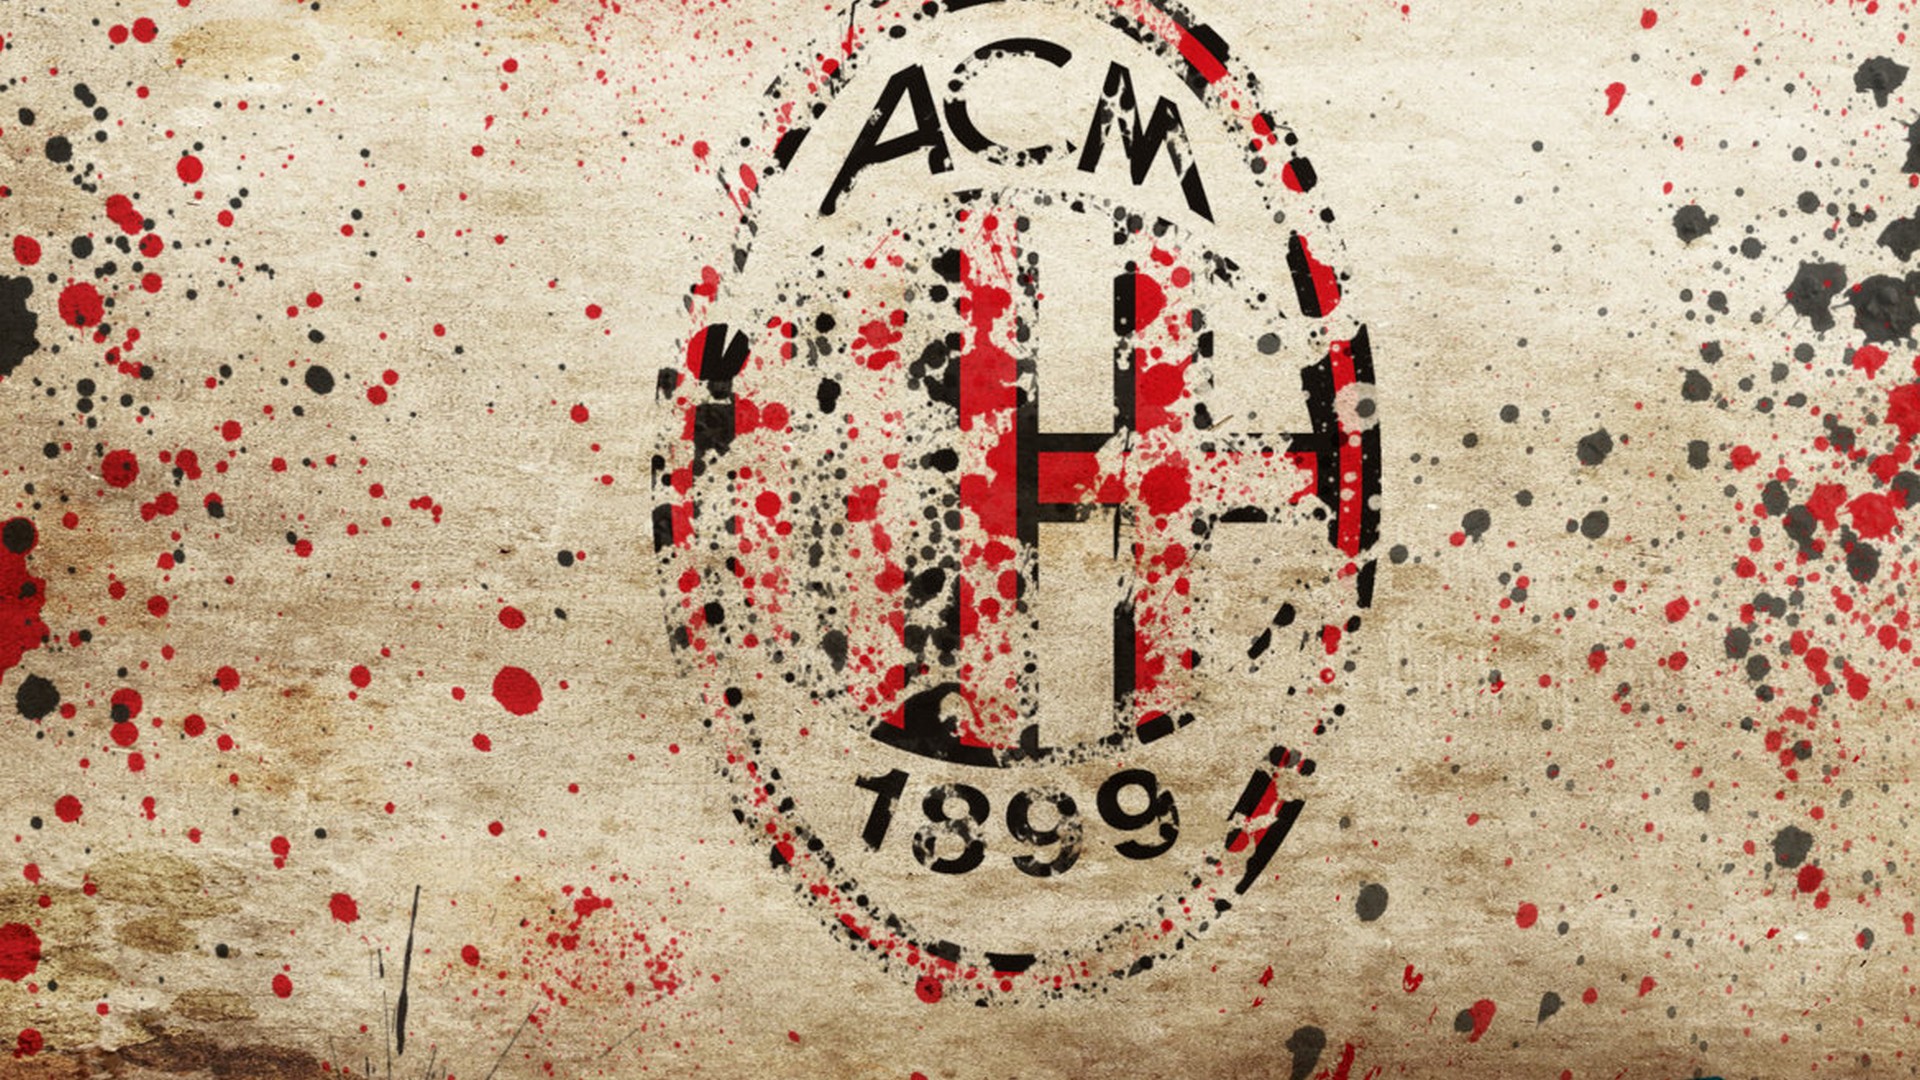 Wallpaper Desktop AC Milan HD with high-resolution 1920x1080 pixel. You can use this wallpaper for your Desktop Computers, Mac Screensavers, Windows Backgrounds, iPhone Wallpapers, Tablet or Android Lock screen and another Mobile device